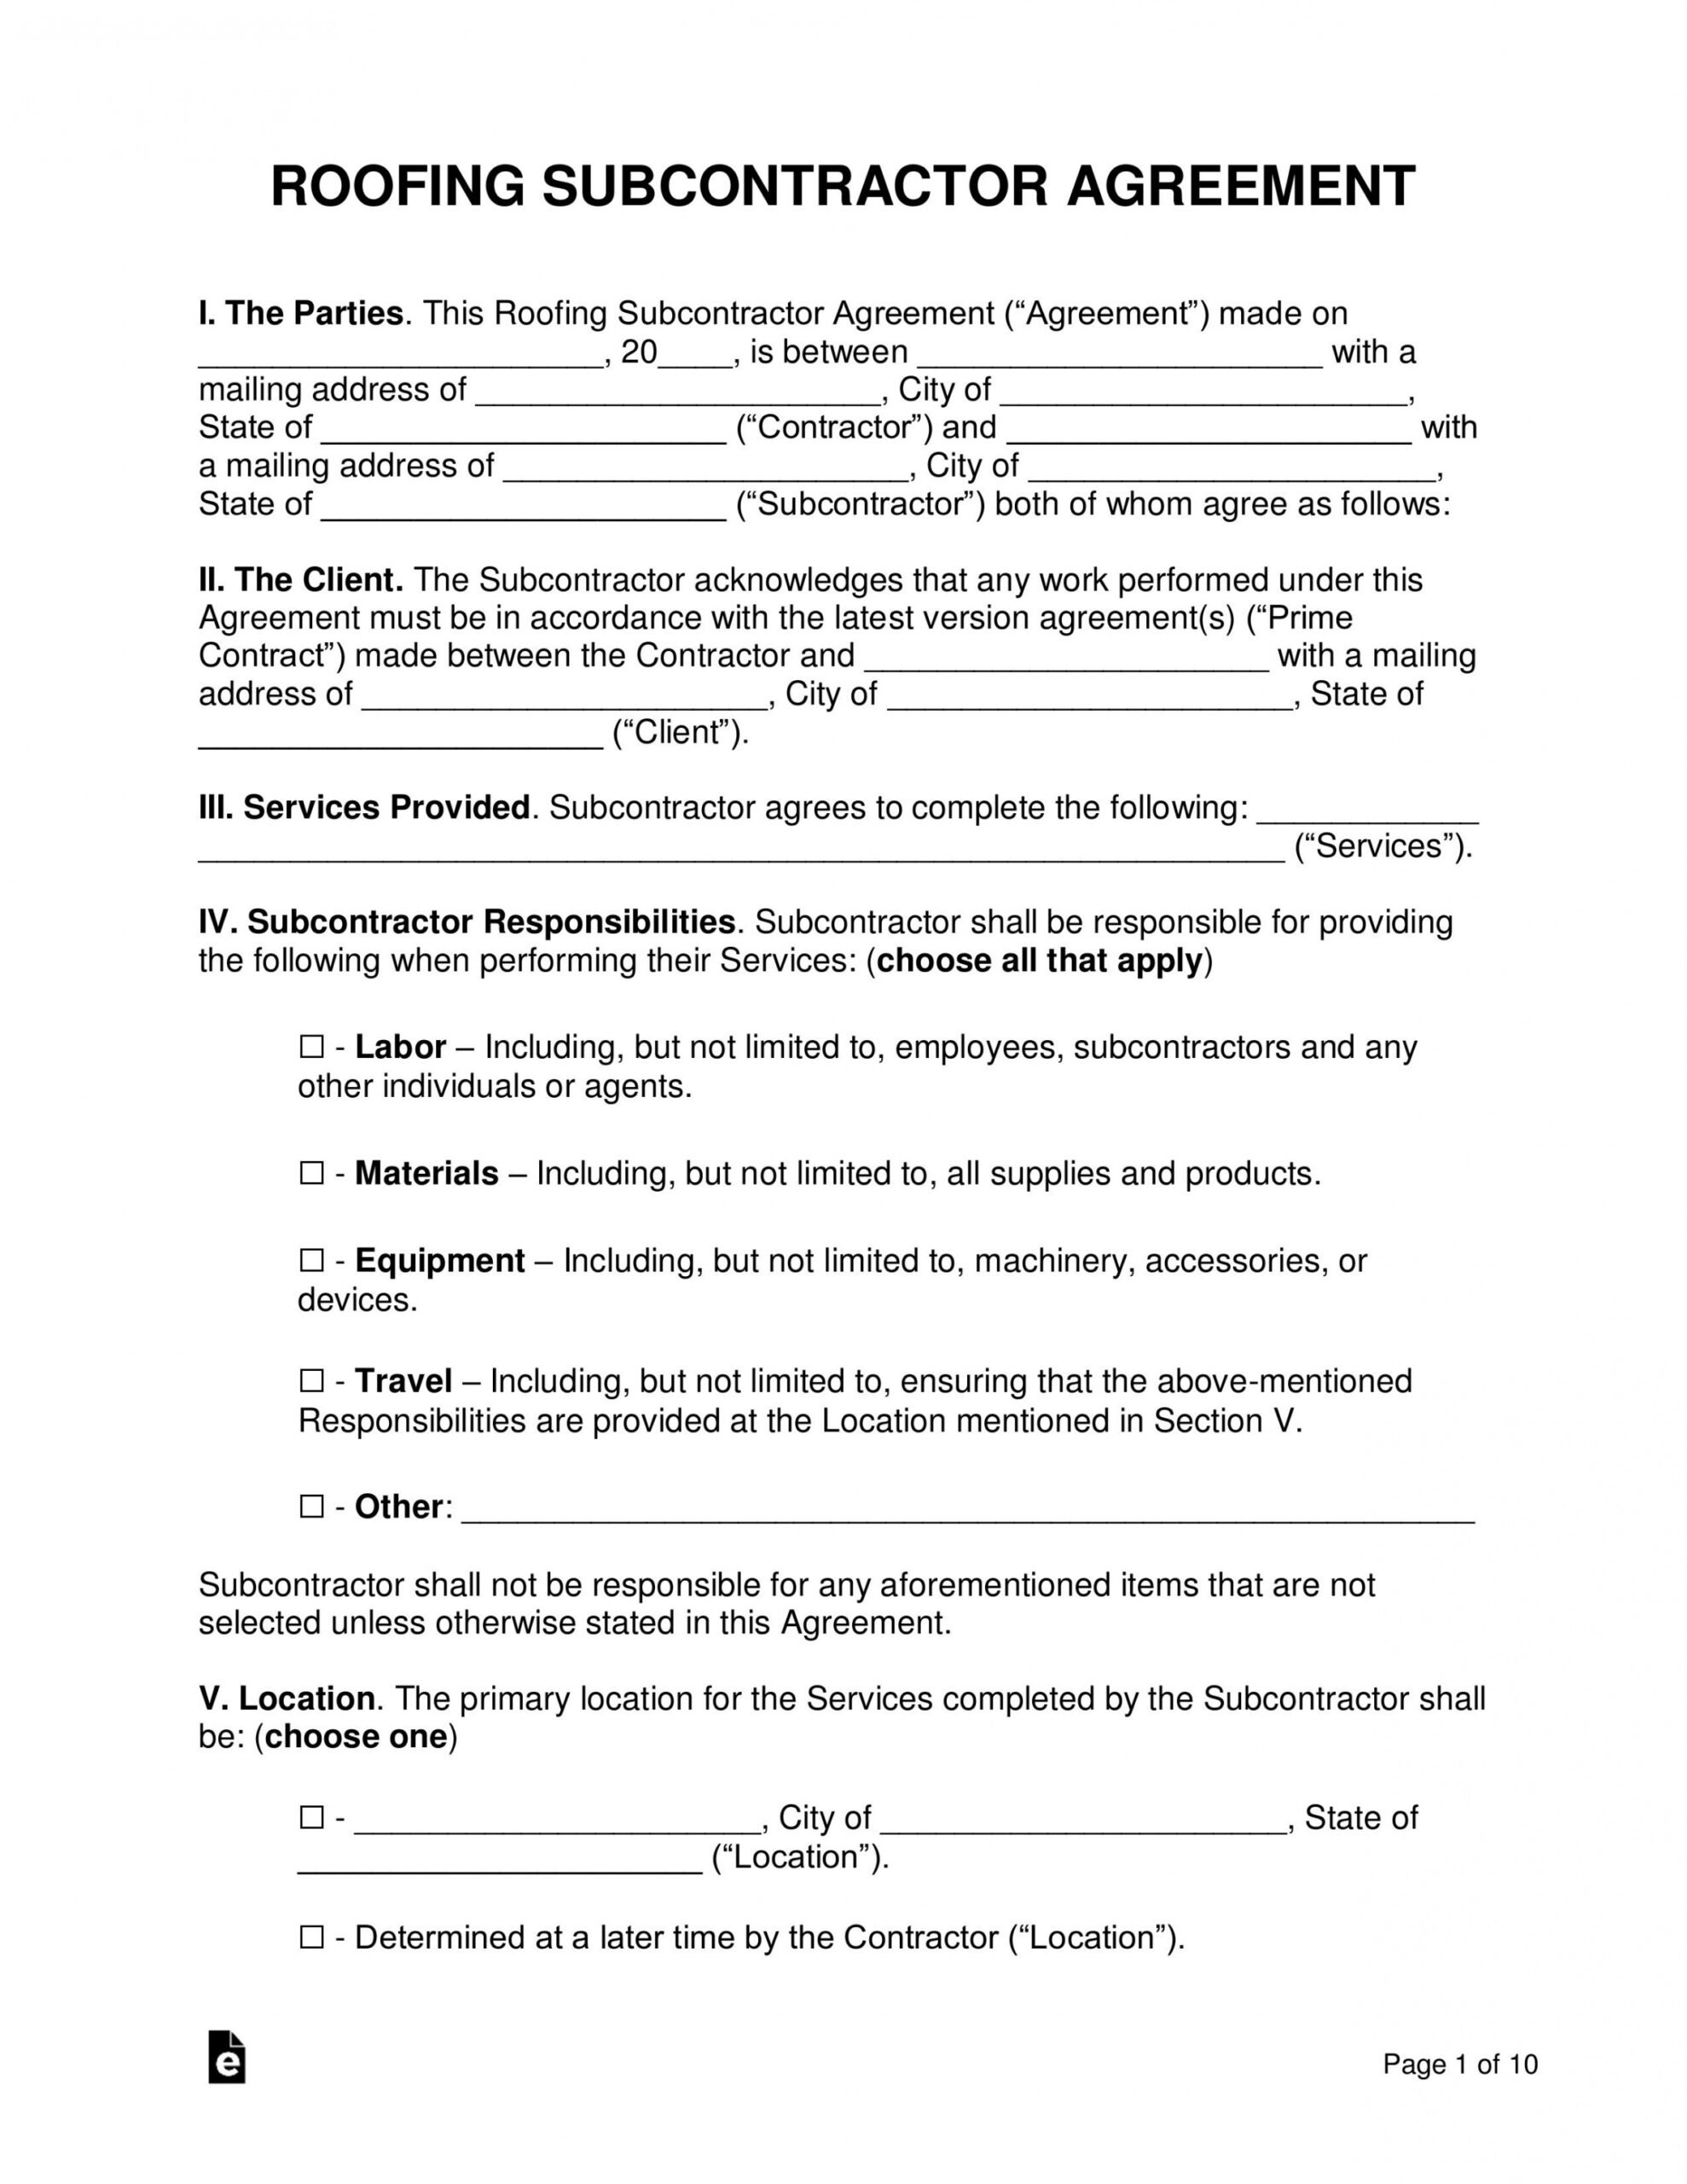 free roofing contract template ~ addictionary roofing contract agreement template example